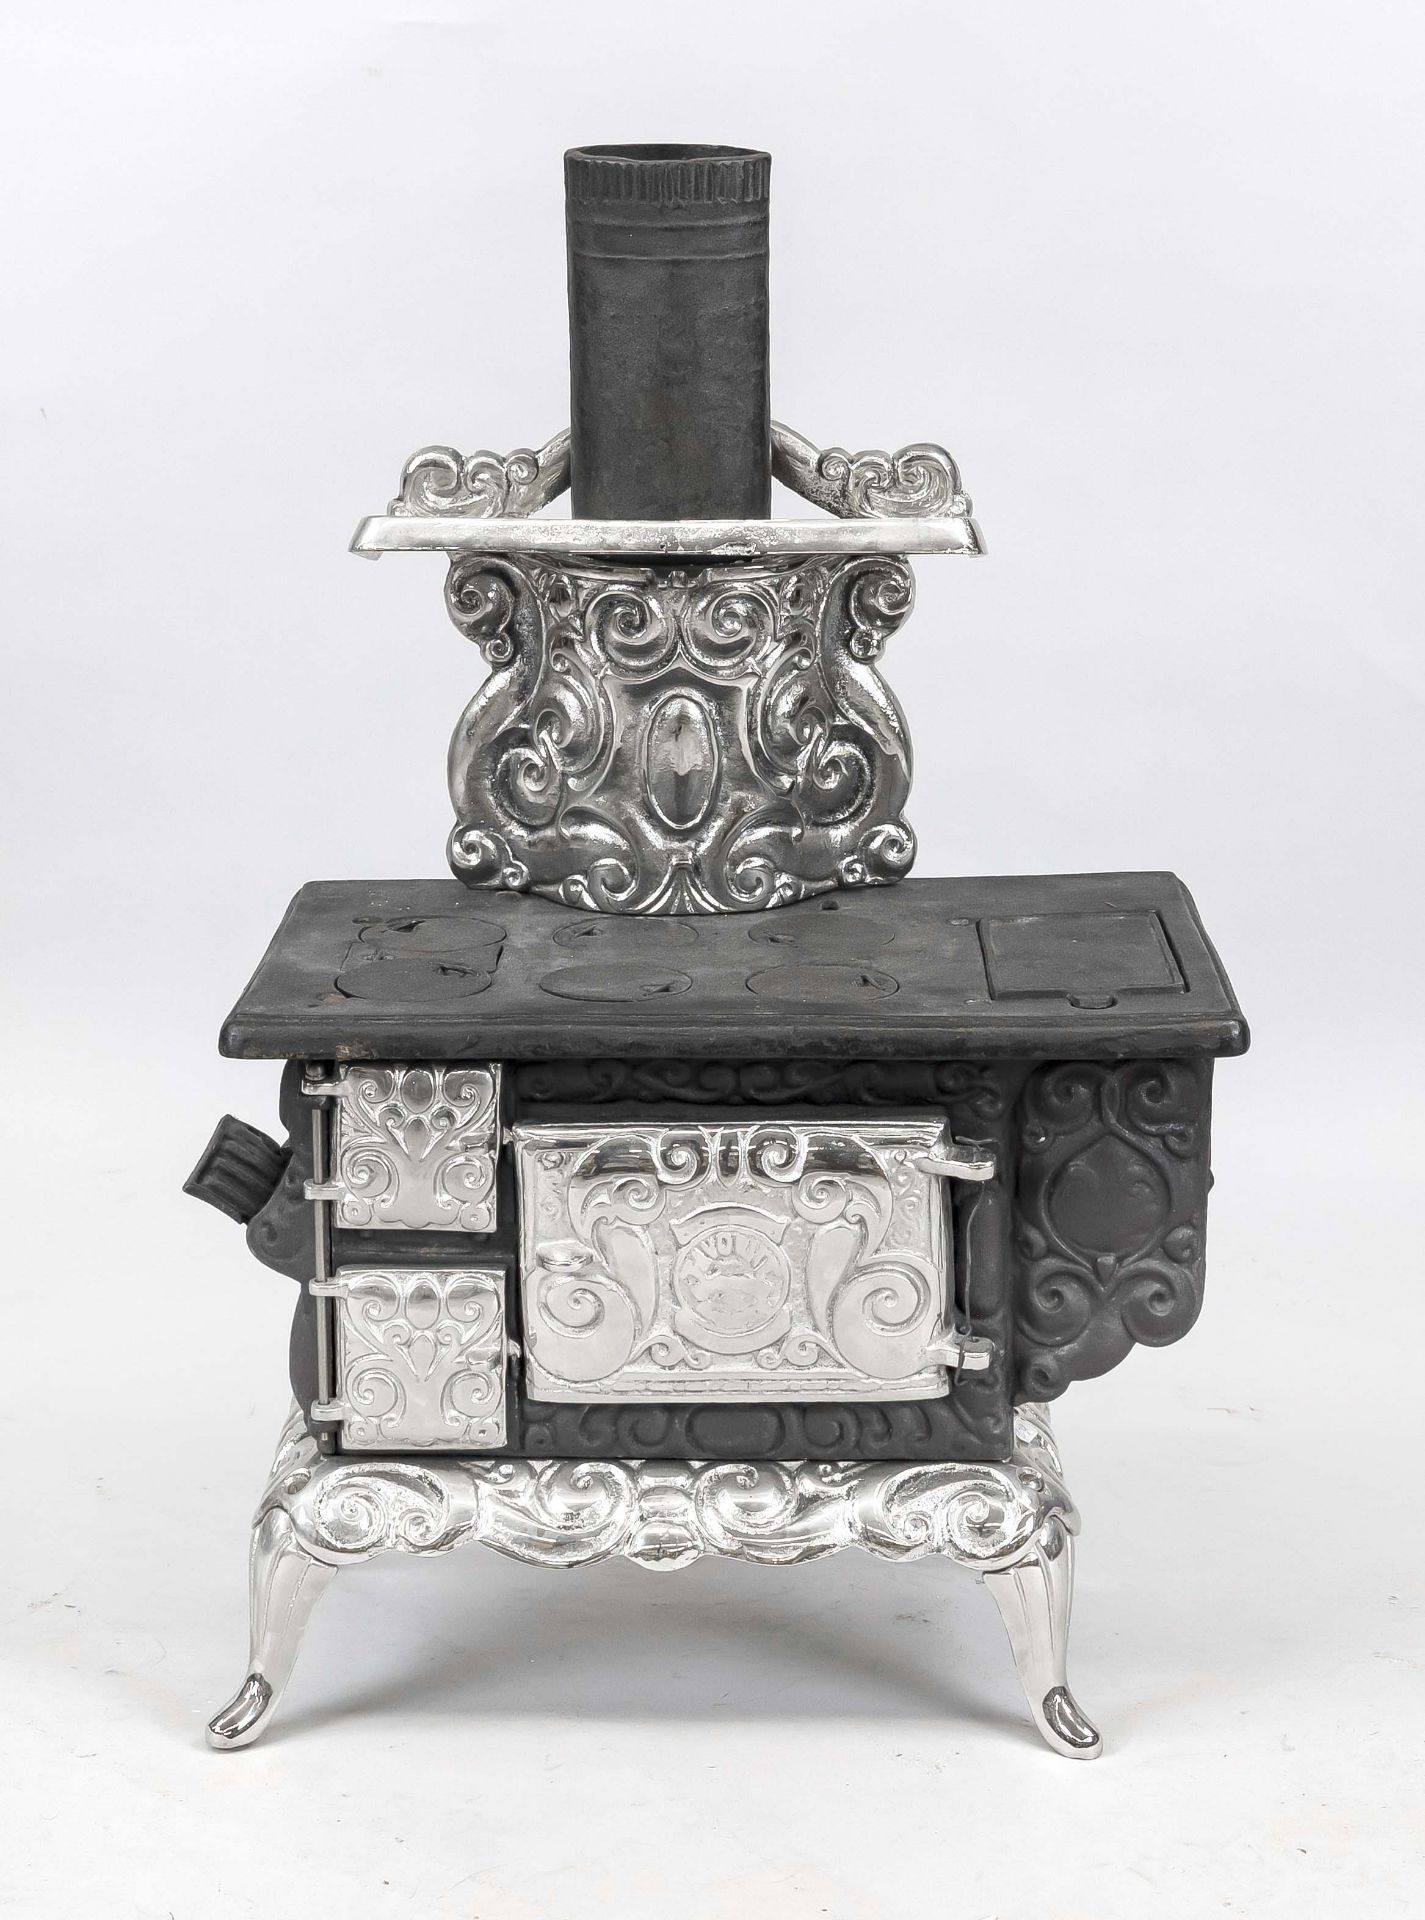 Children's stove/oven model, probably 1st half 20th century, cast iron, partially sprayed/painted